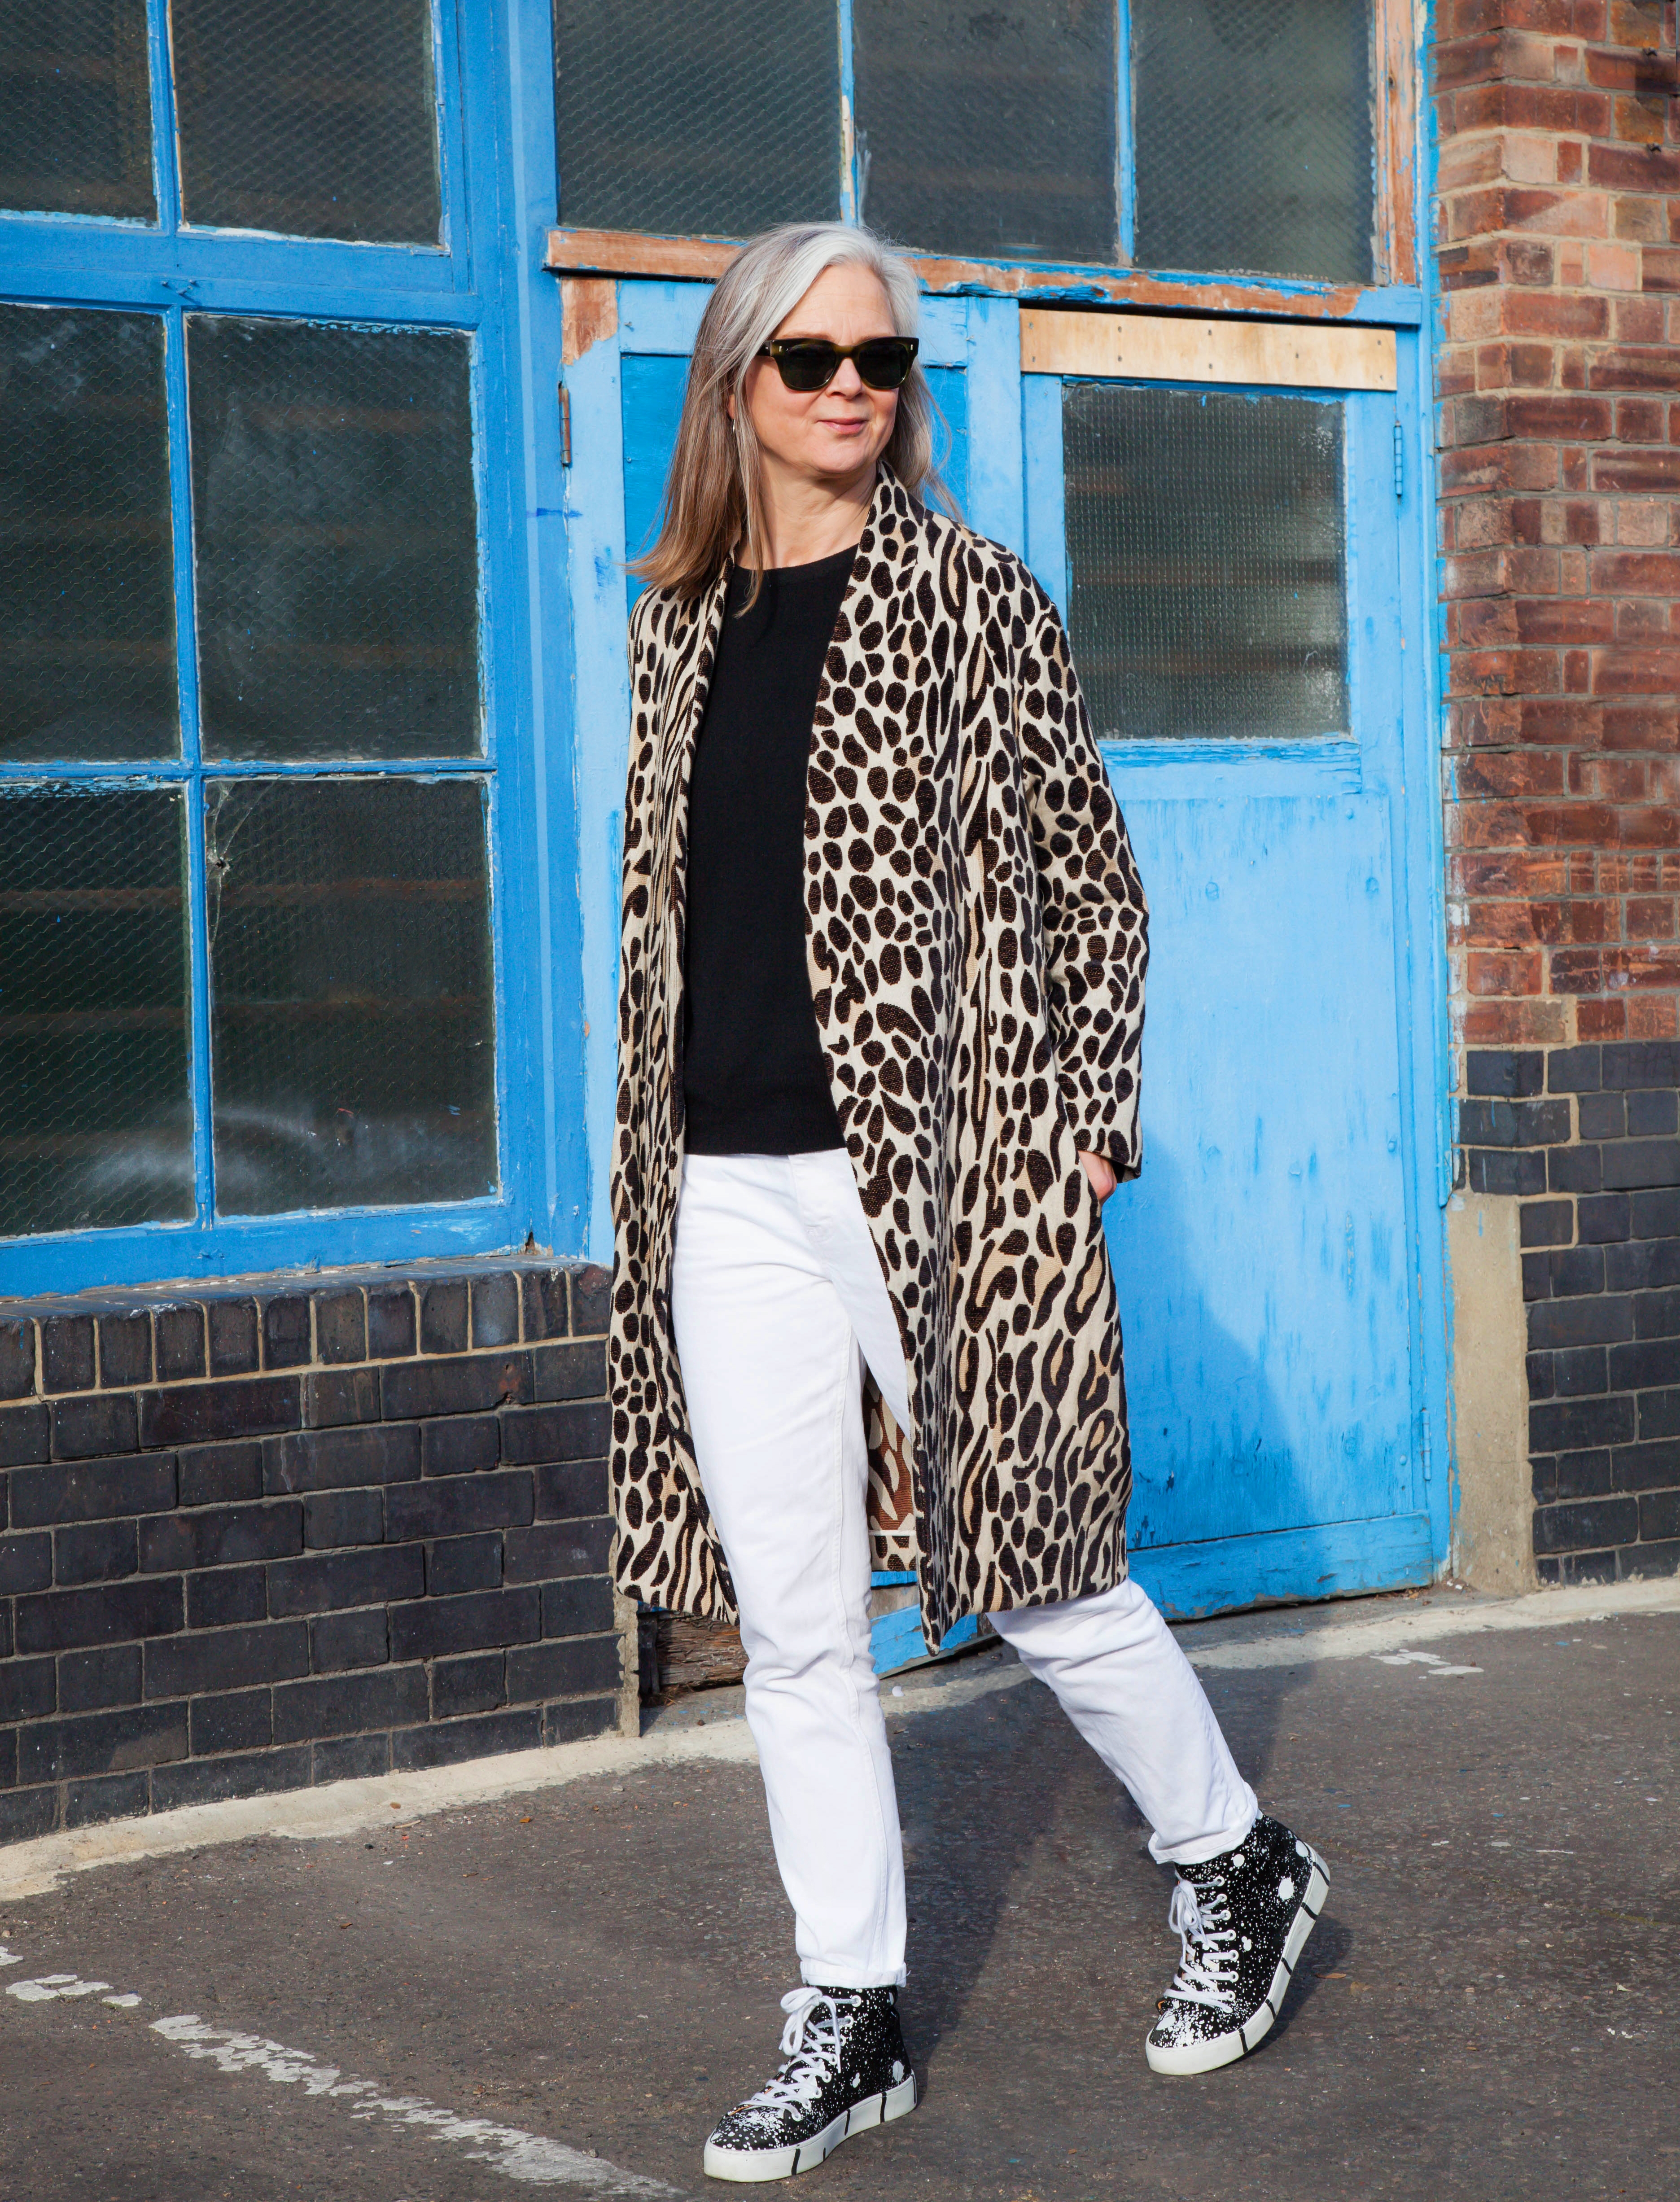 Leopard Print Accessories You Can Wear Now